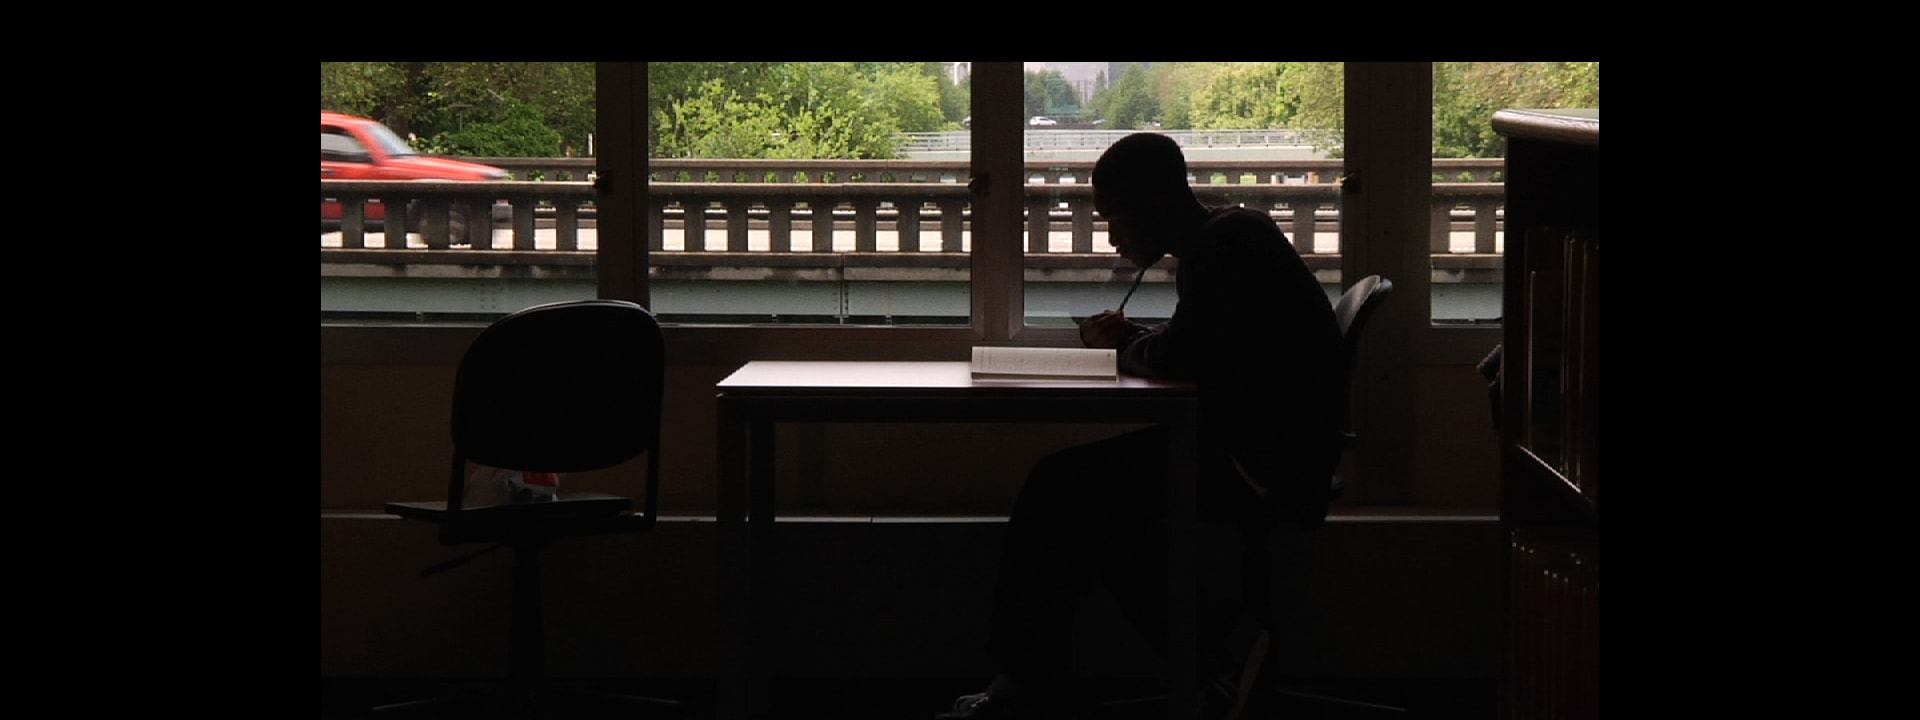 A young person is working at a desk. A red car is crossing a bridge in the background.